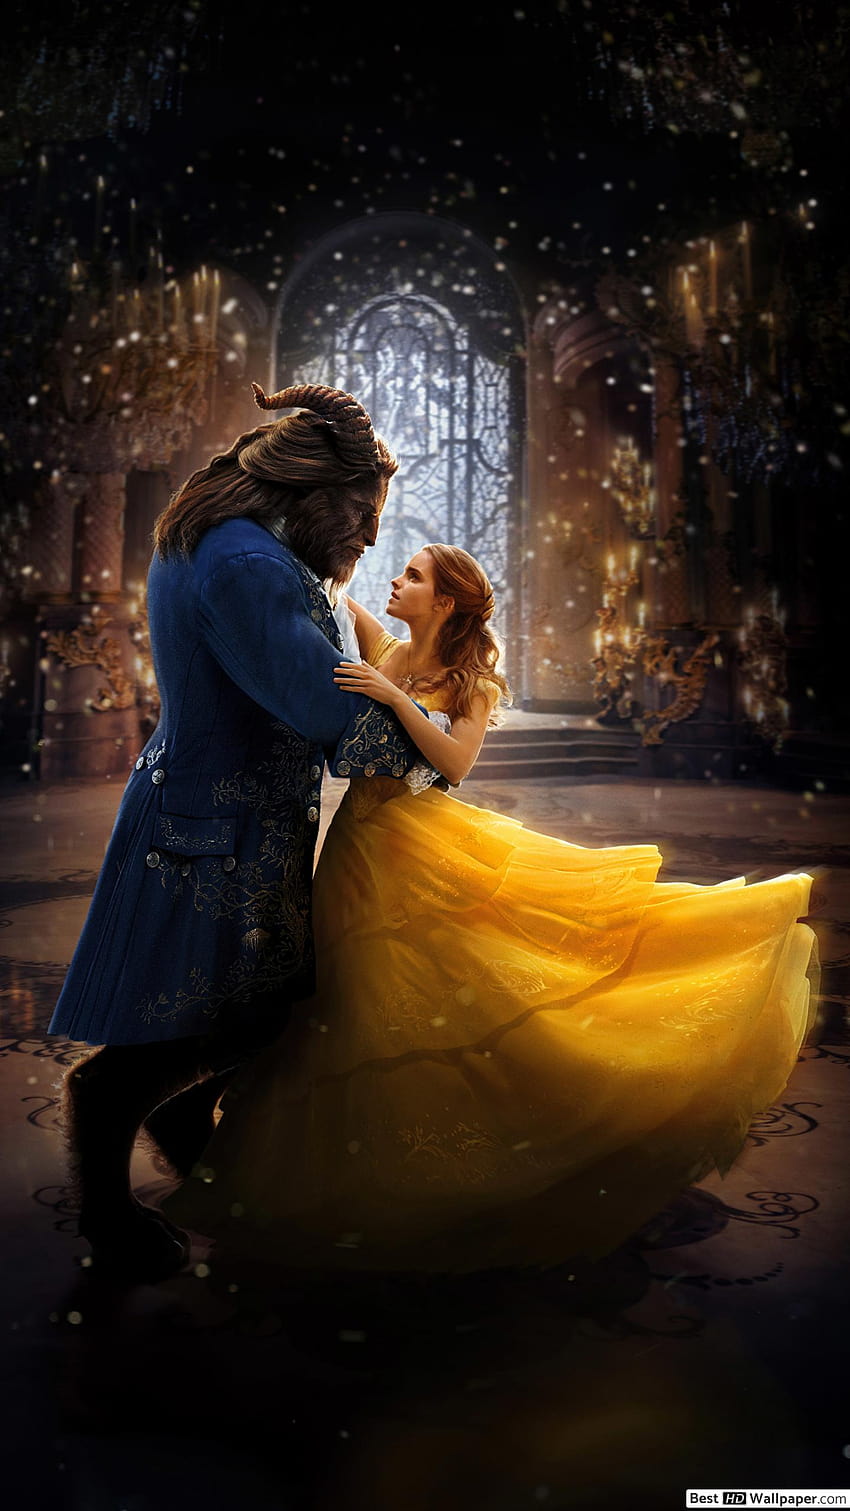 Film Beauty and the Beast 2017, belle and beast wallpaper ponsel HD